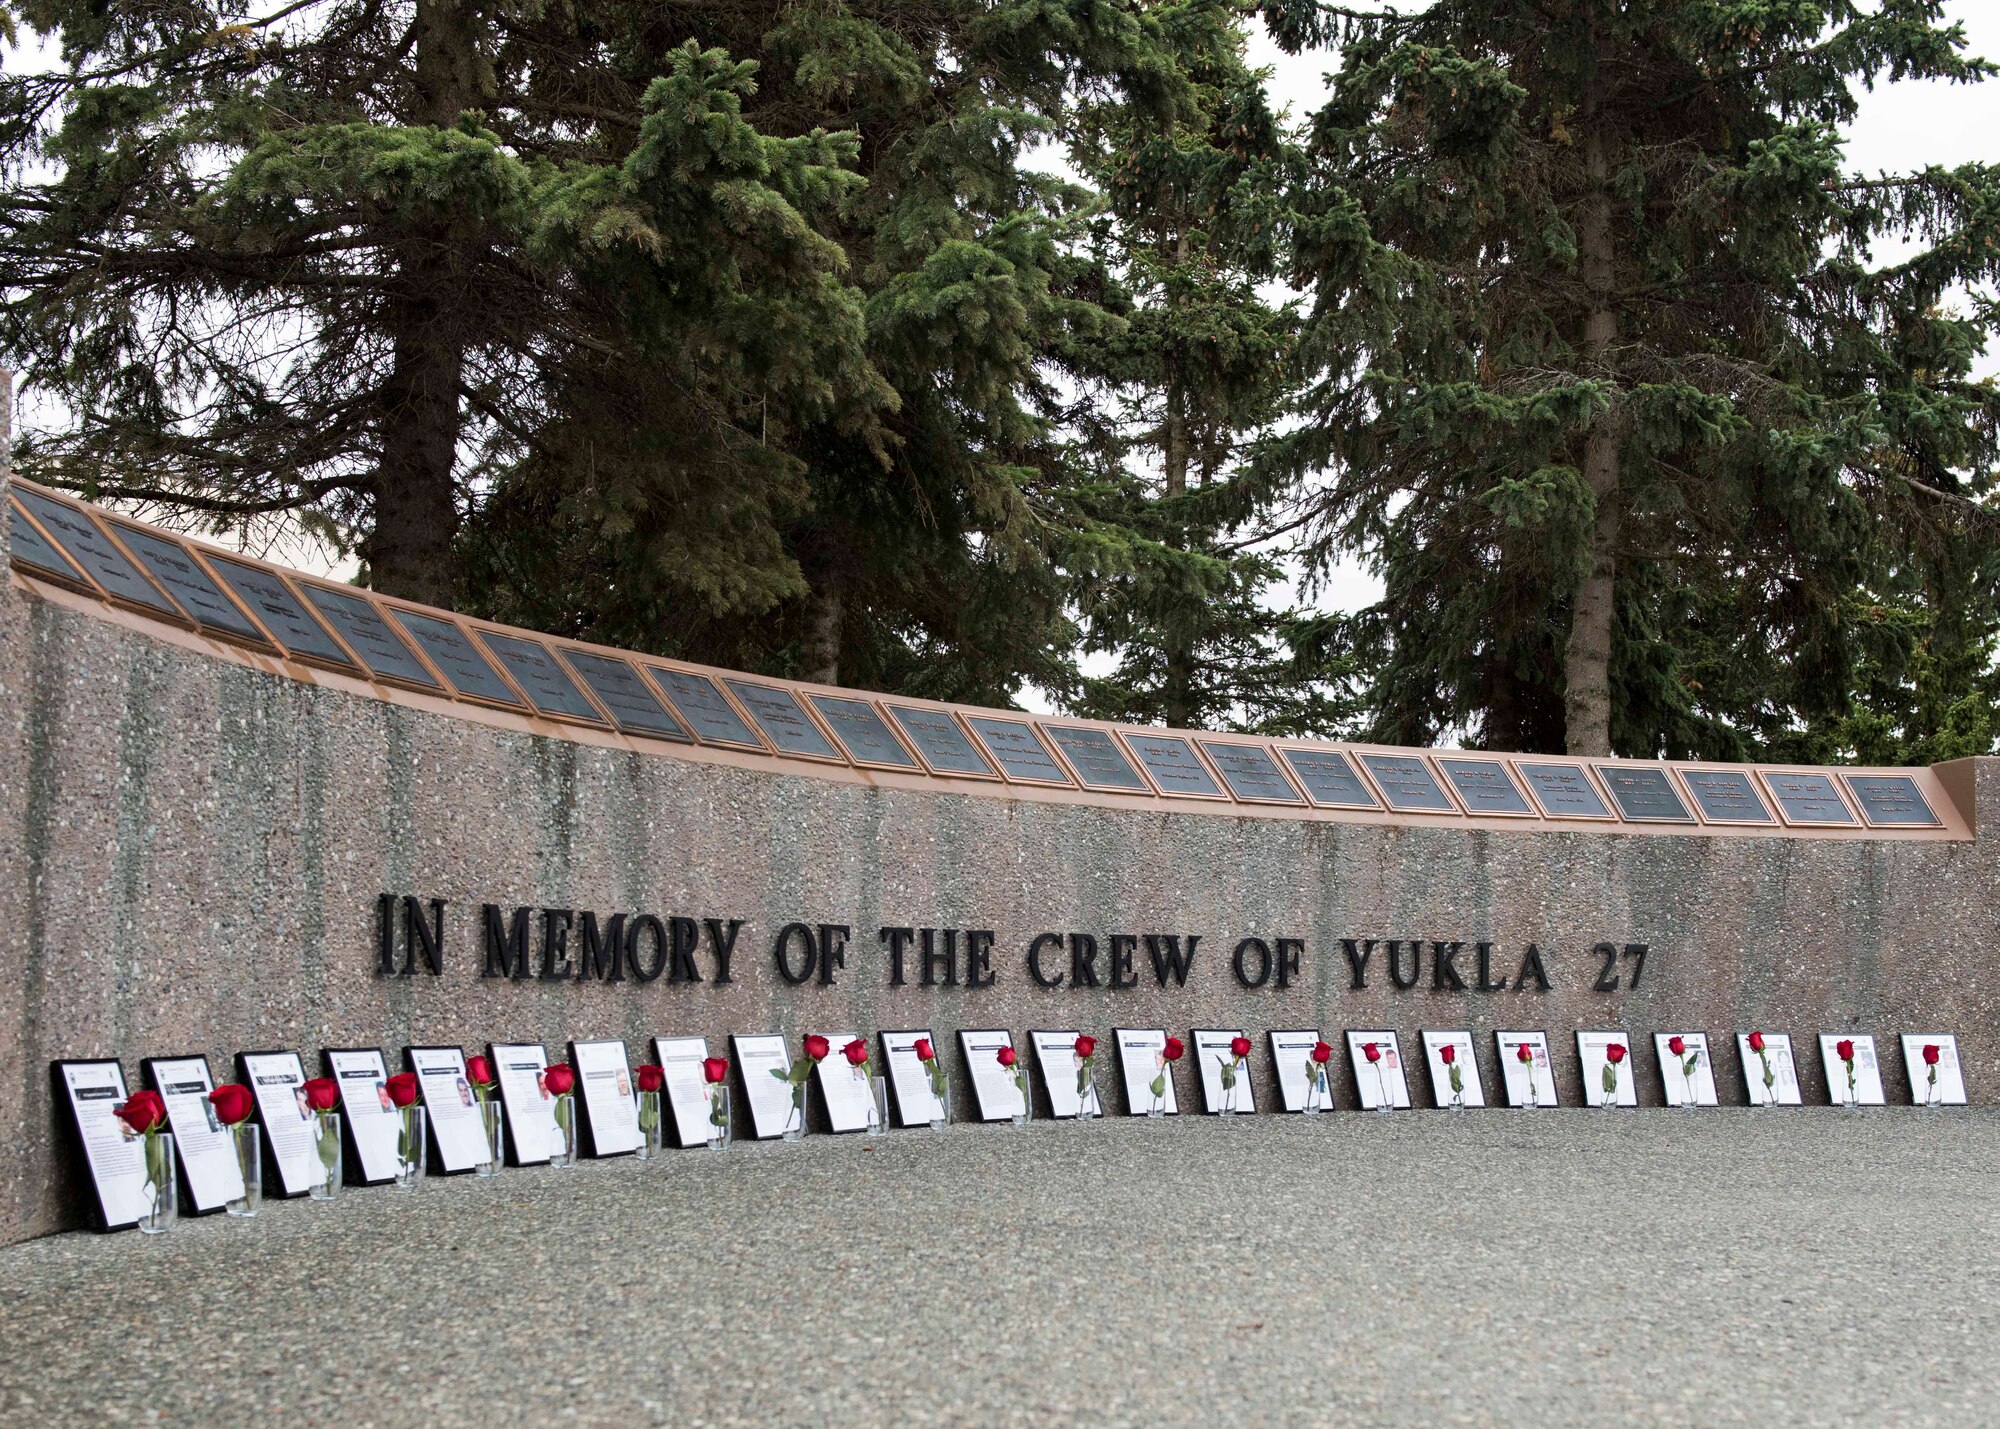 Surviving family members, distinguished guests and members of 962nd Airborne Air Control Squadron attend the Yukla 27 25th anniversary memorial ceremony at Joint Base Elmendorf-Richardson, Alaska, Sept. 22, 2020. Yukla 27, a U.S. Air Force E-3 Sentry airborne warning and control system aircraft assigned to the 962nd AACS, encountered a flock of geese Sept. 22, 1995, and crashed shortly after takeoff on a routine surveillance training sortie, killing all 24 Canadian and U.S. Airmen aboard.